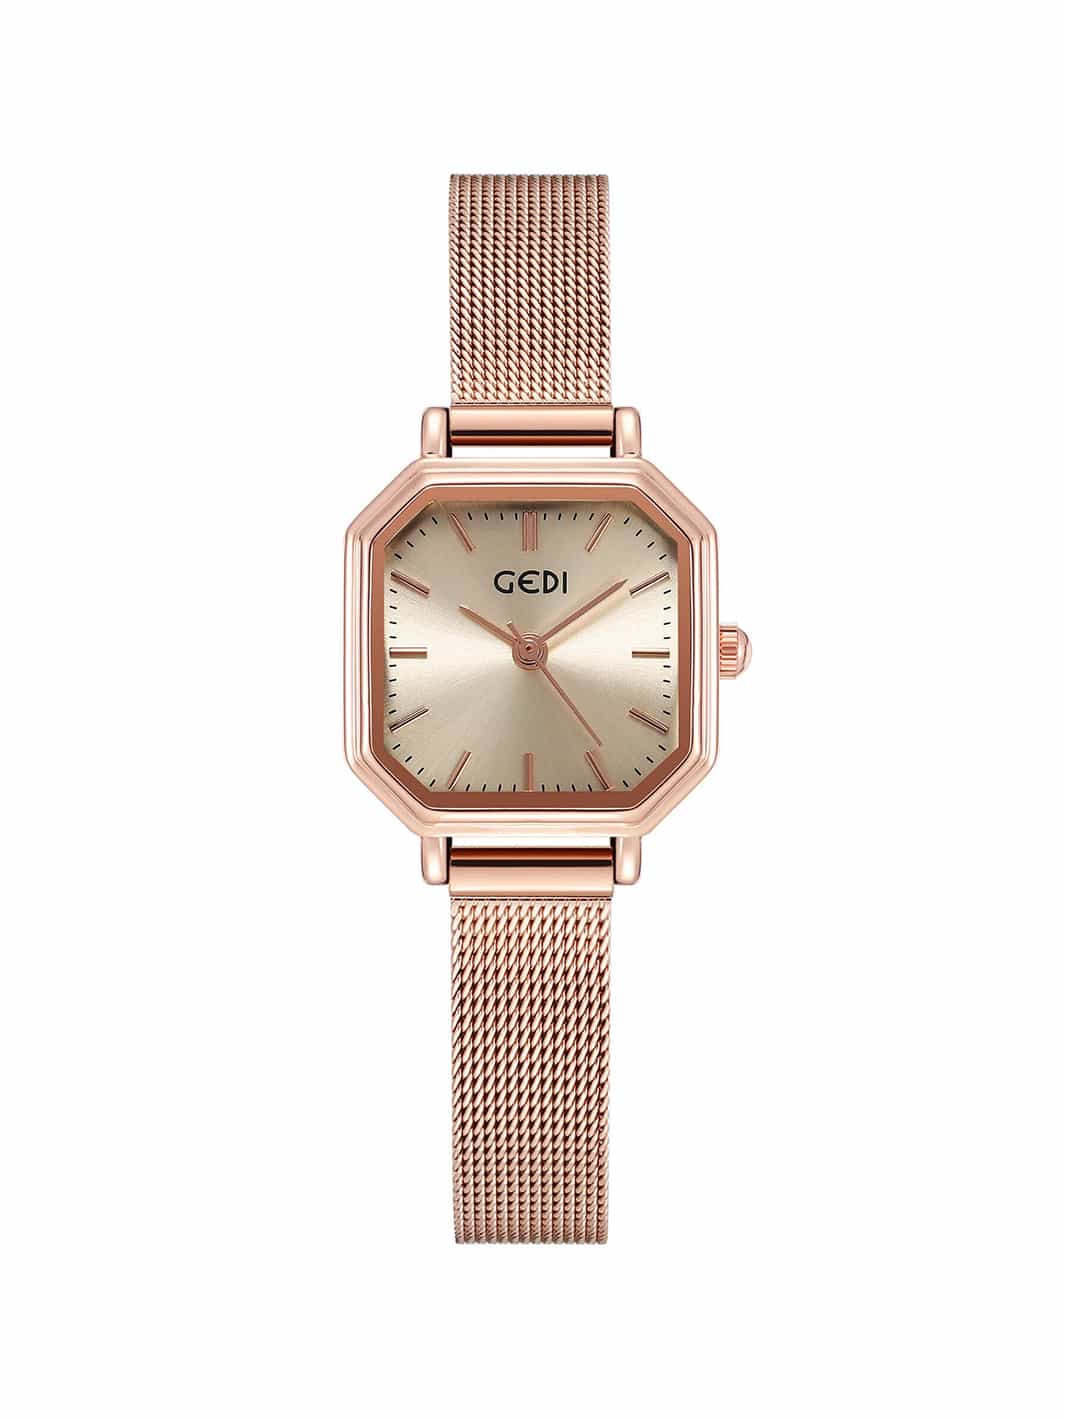 Leather strap gradient watches for women from Gedi Brand - Ariano